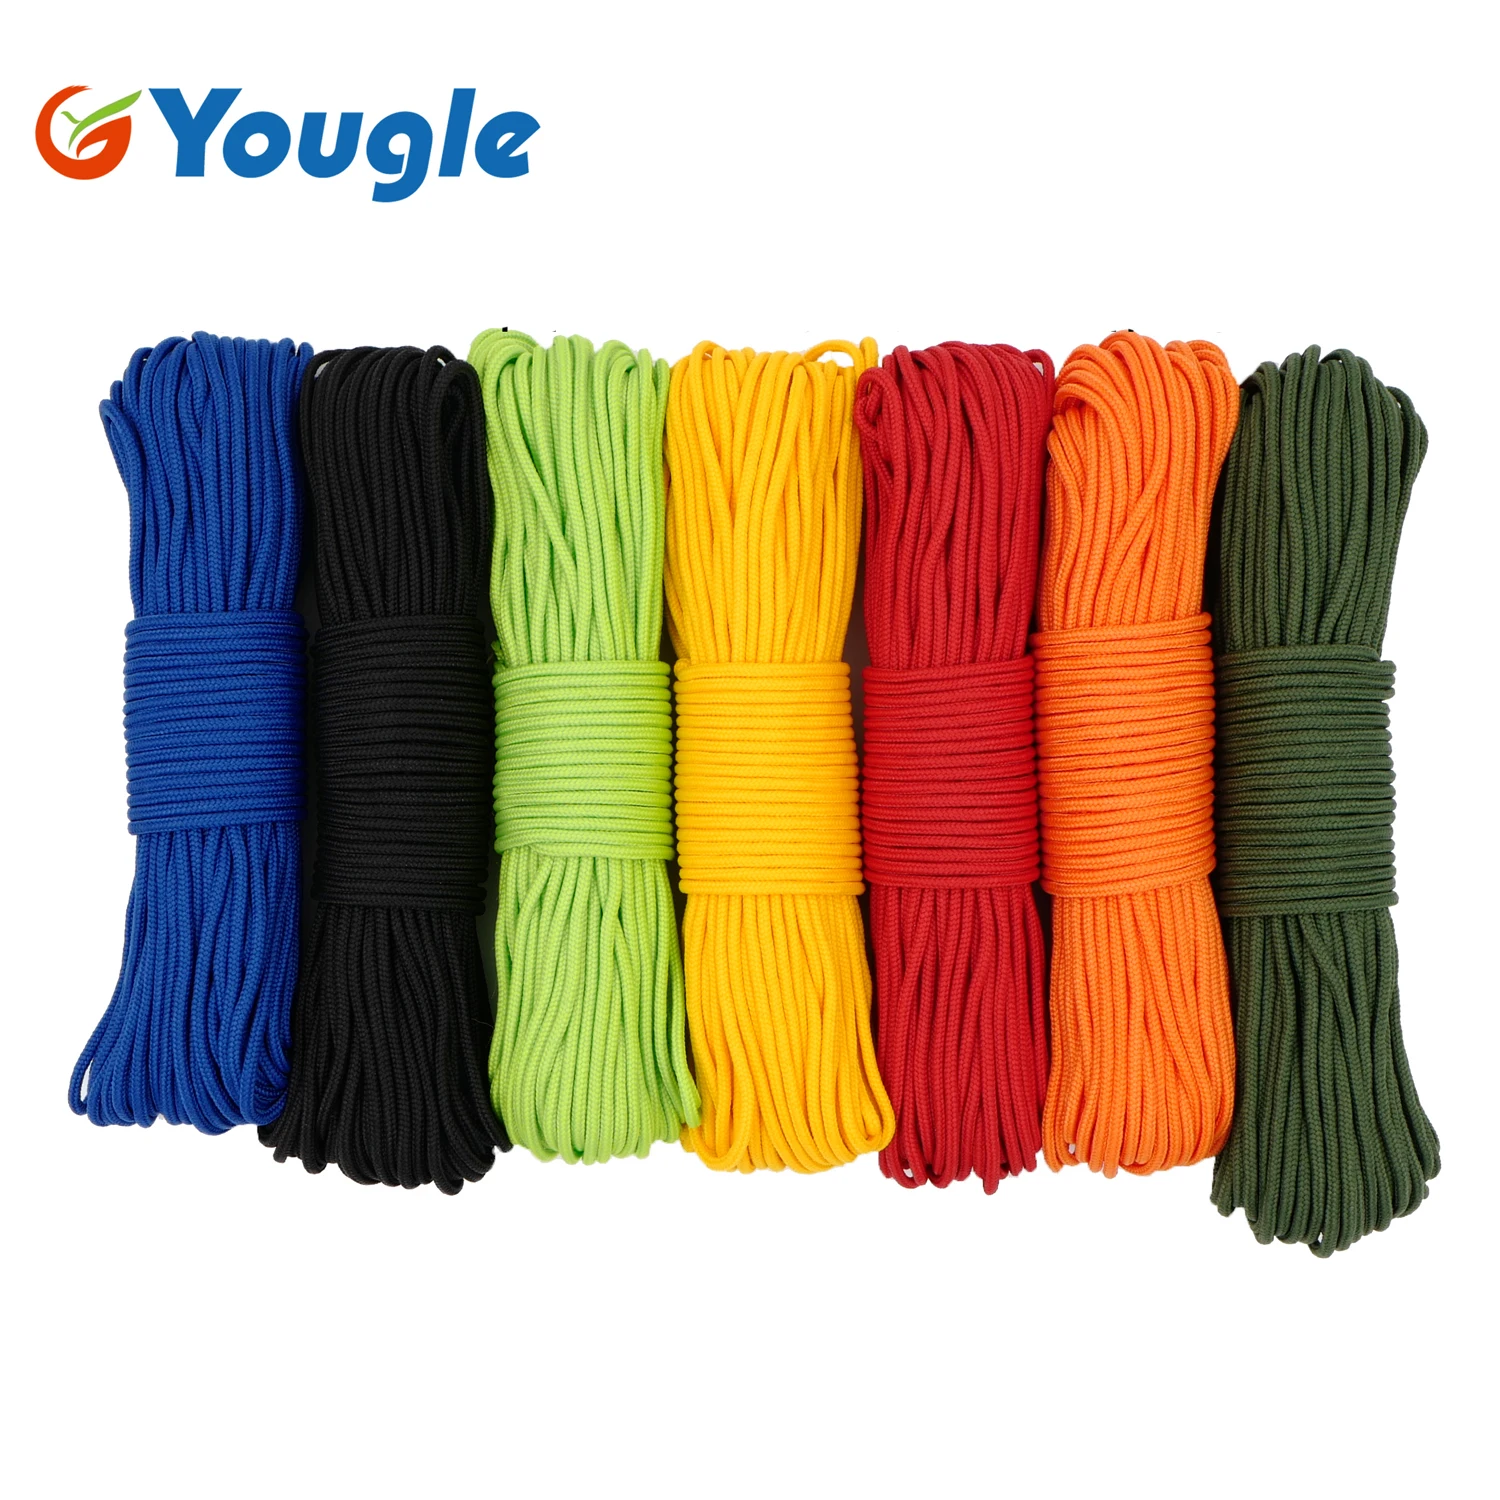 

NEW 100FT 3.5mm 300LB 4 Strands Paracord Parachute Cord Micro Cord Lanyard Guyline Tent Rope For Outdoor Camping Hiking Bracelet